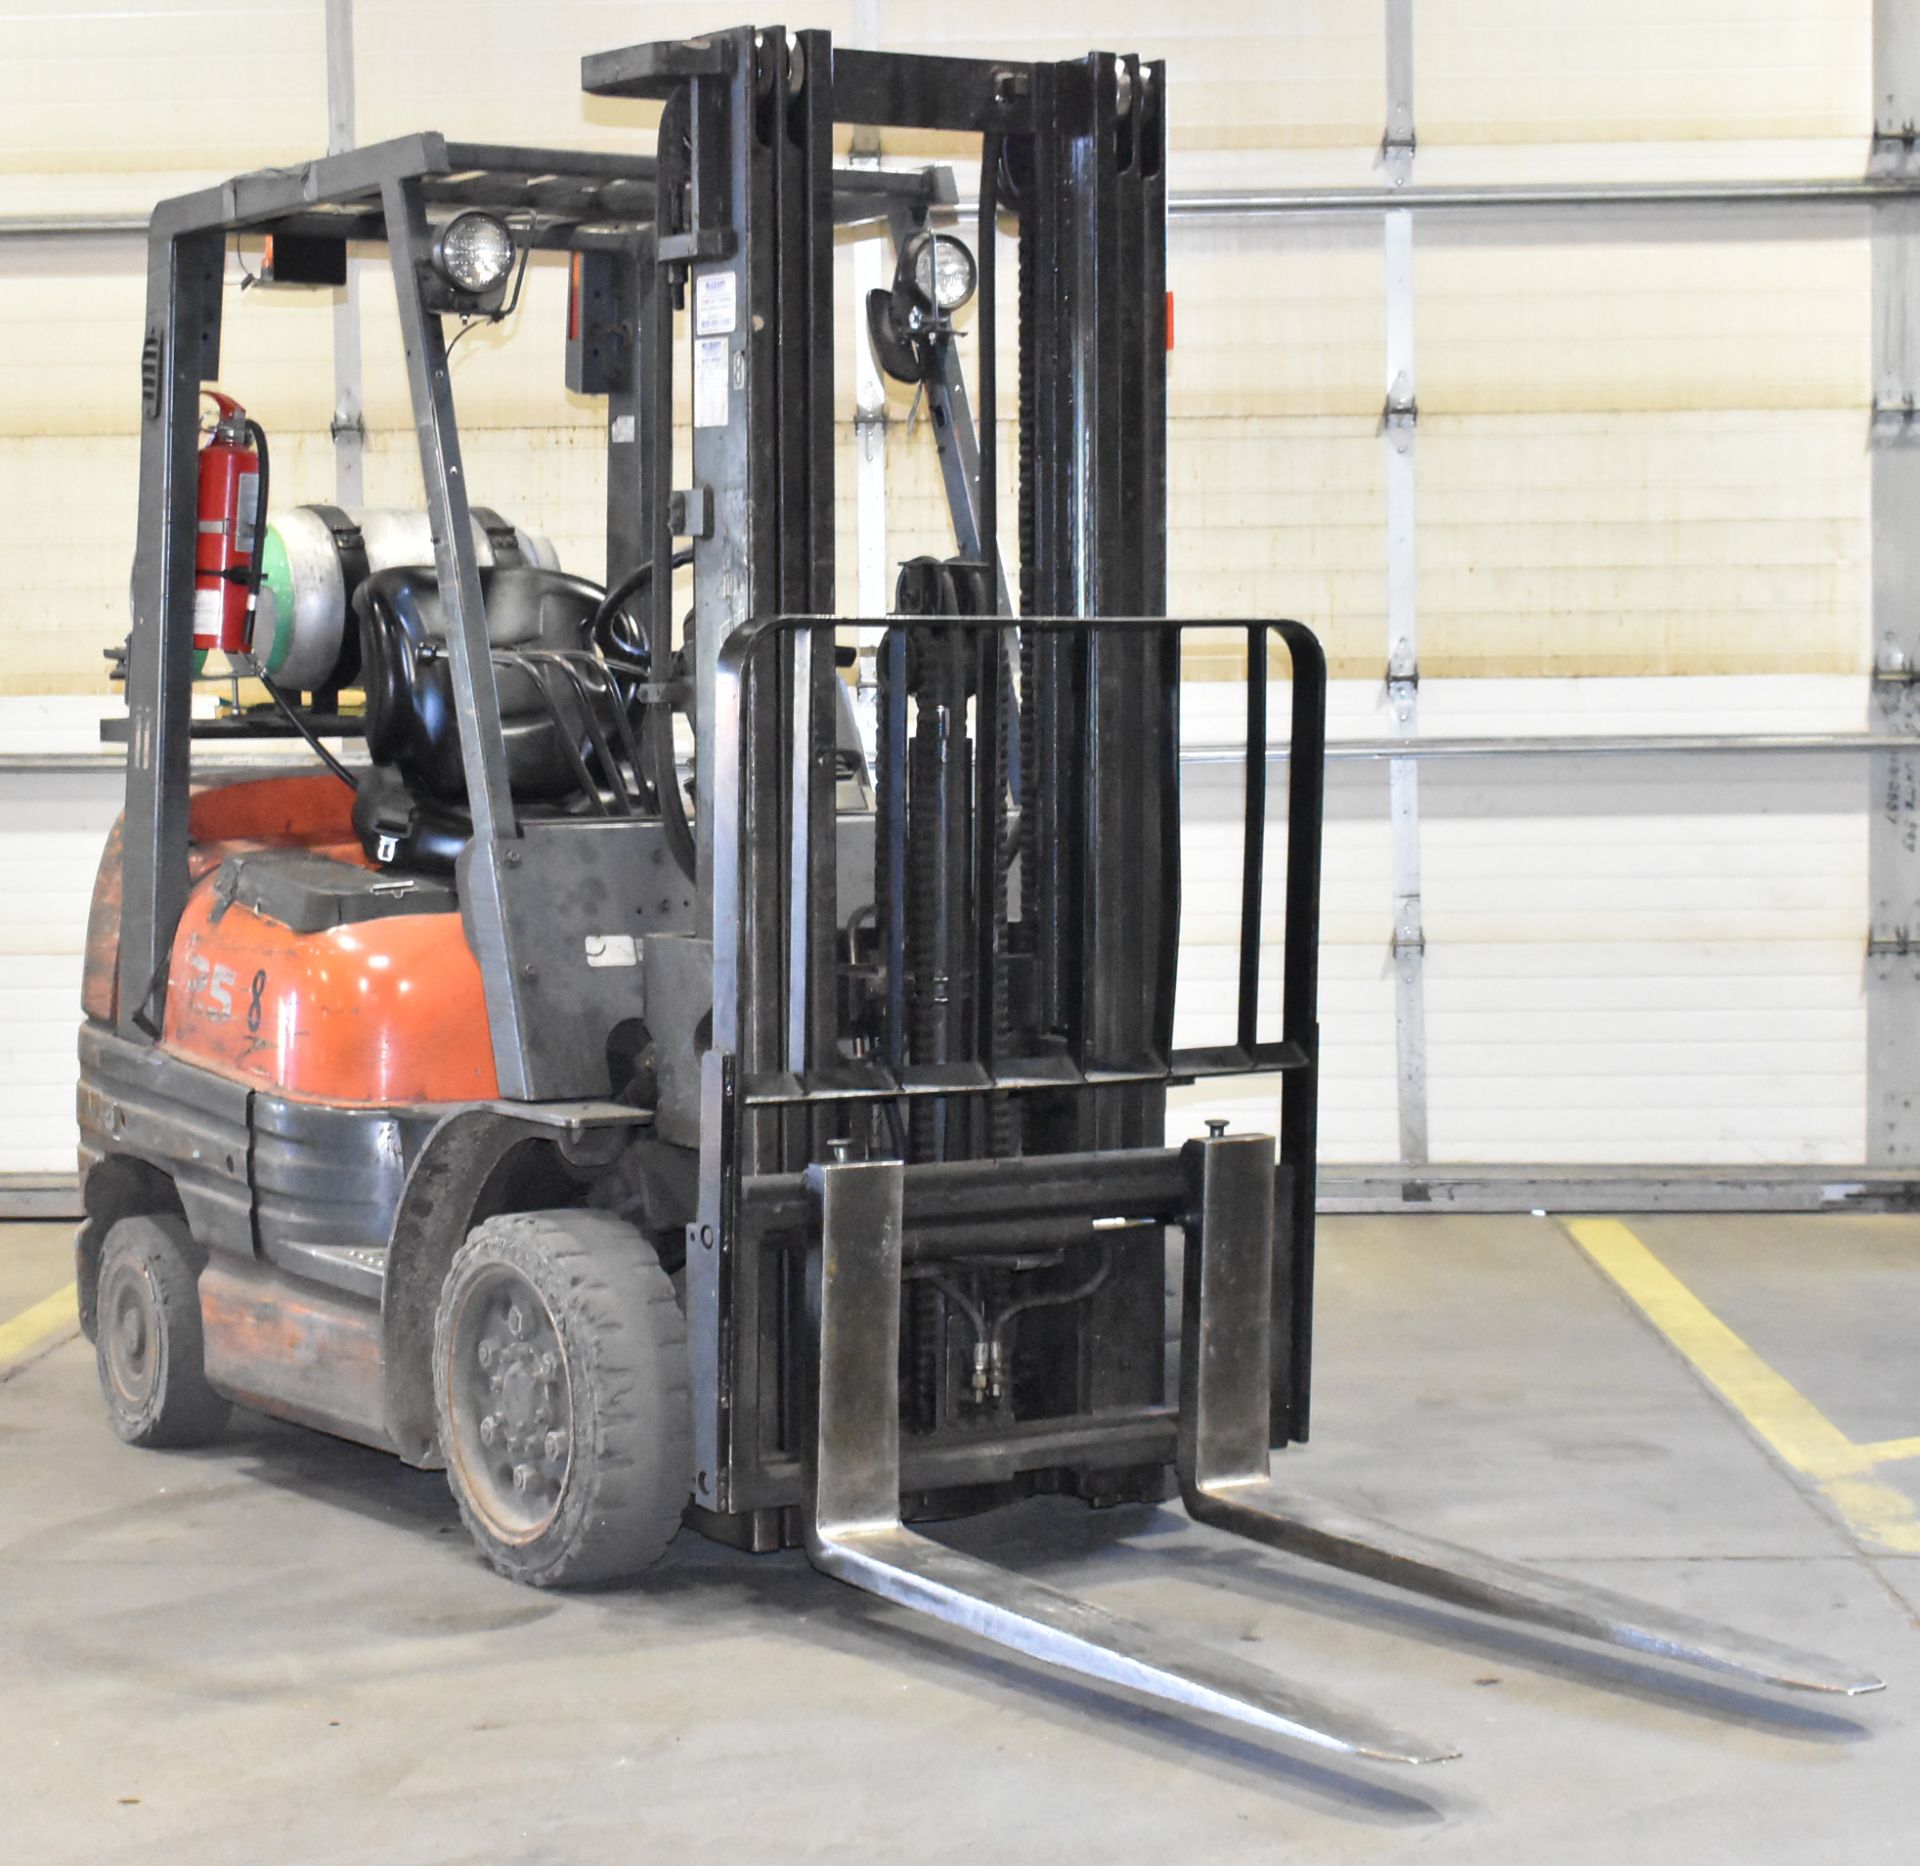 TOYOTA 42-6FGCU25 4,900 LB. CAPACITY LPG FORKLIFT WITH 189" MAX. LIFT HEIGHT, 3-STAGE MAST, SIDE - Image 3 of 17